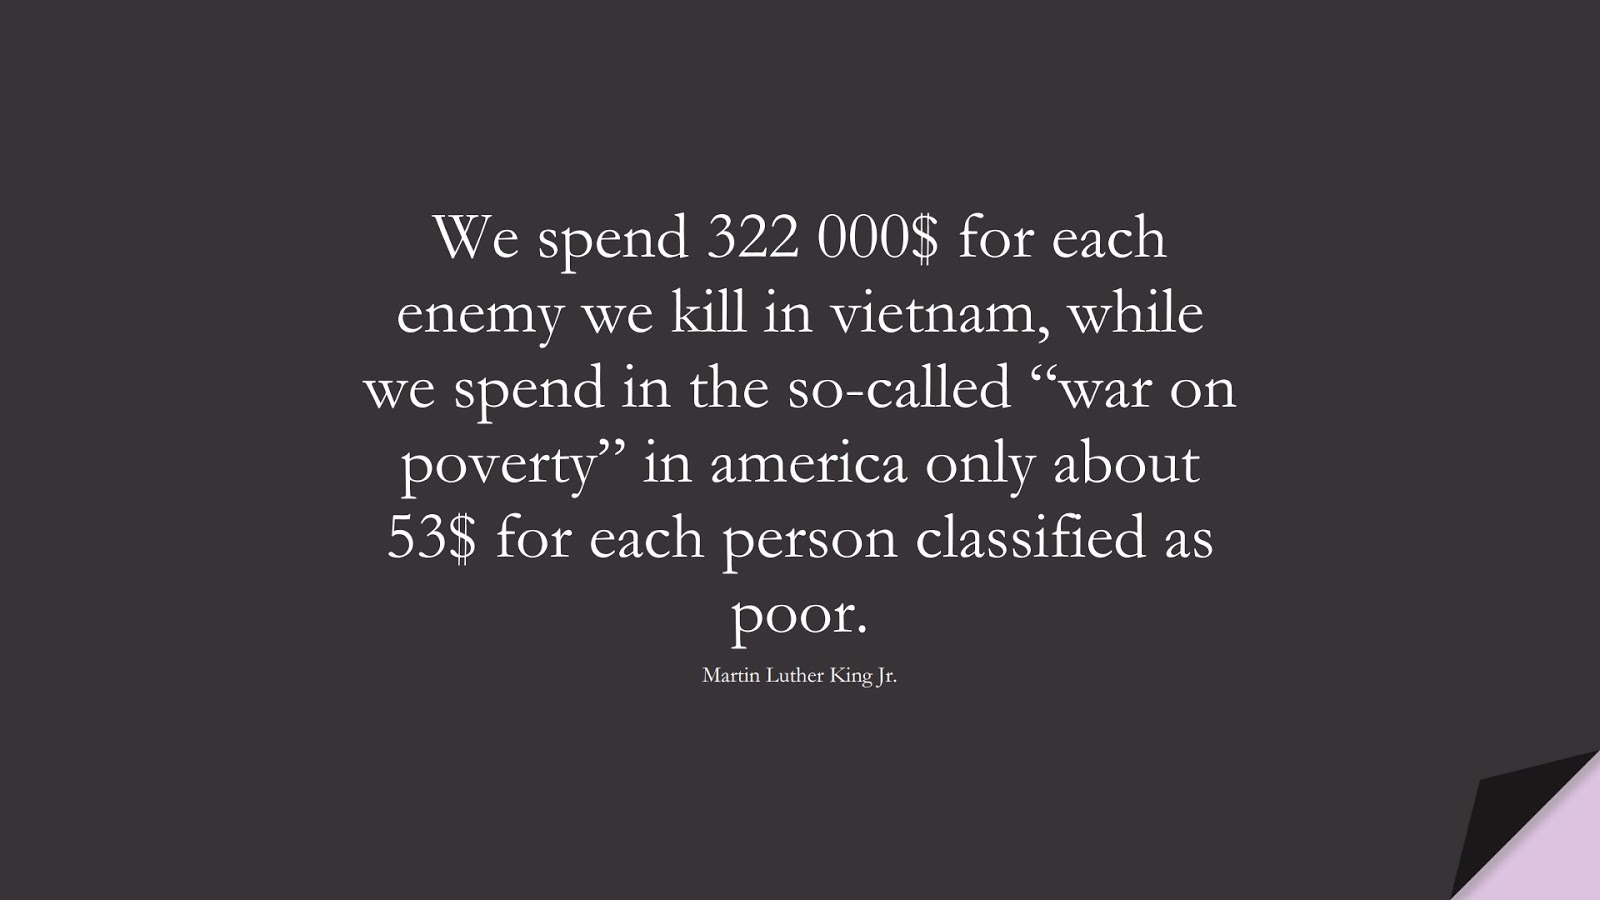 We spend 322 000$ for each enemy we kill in vietnam, while we spend in the so-called “war on poverty” in america only about 53$ for each person classified as poor. (Martin Luther King Jr.);  #MartinLutherKingJrQuotes